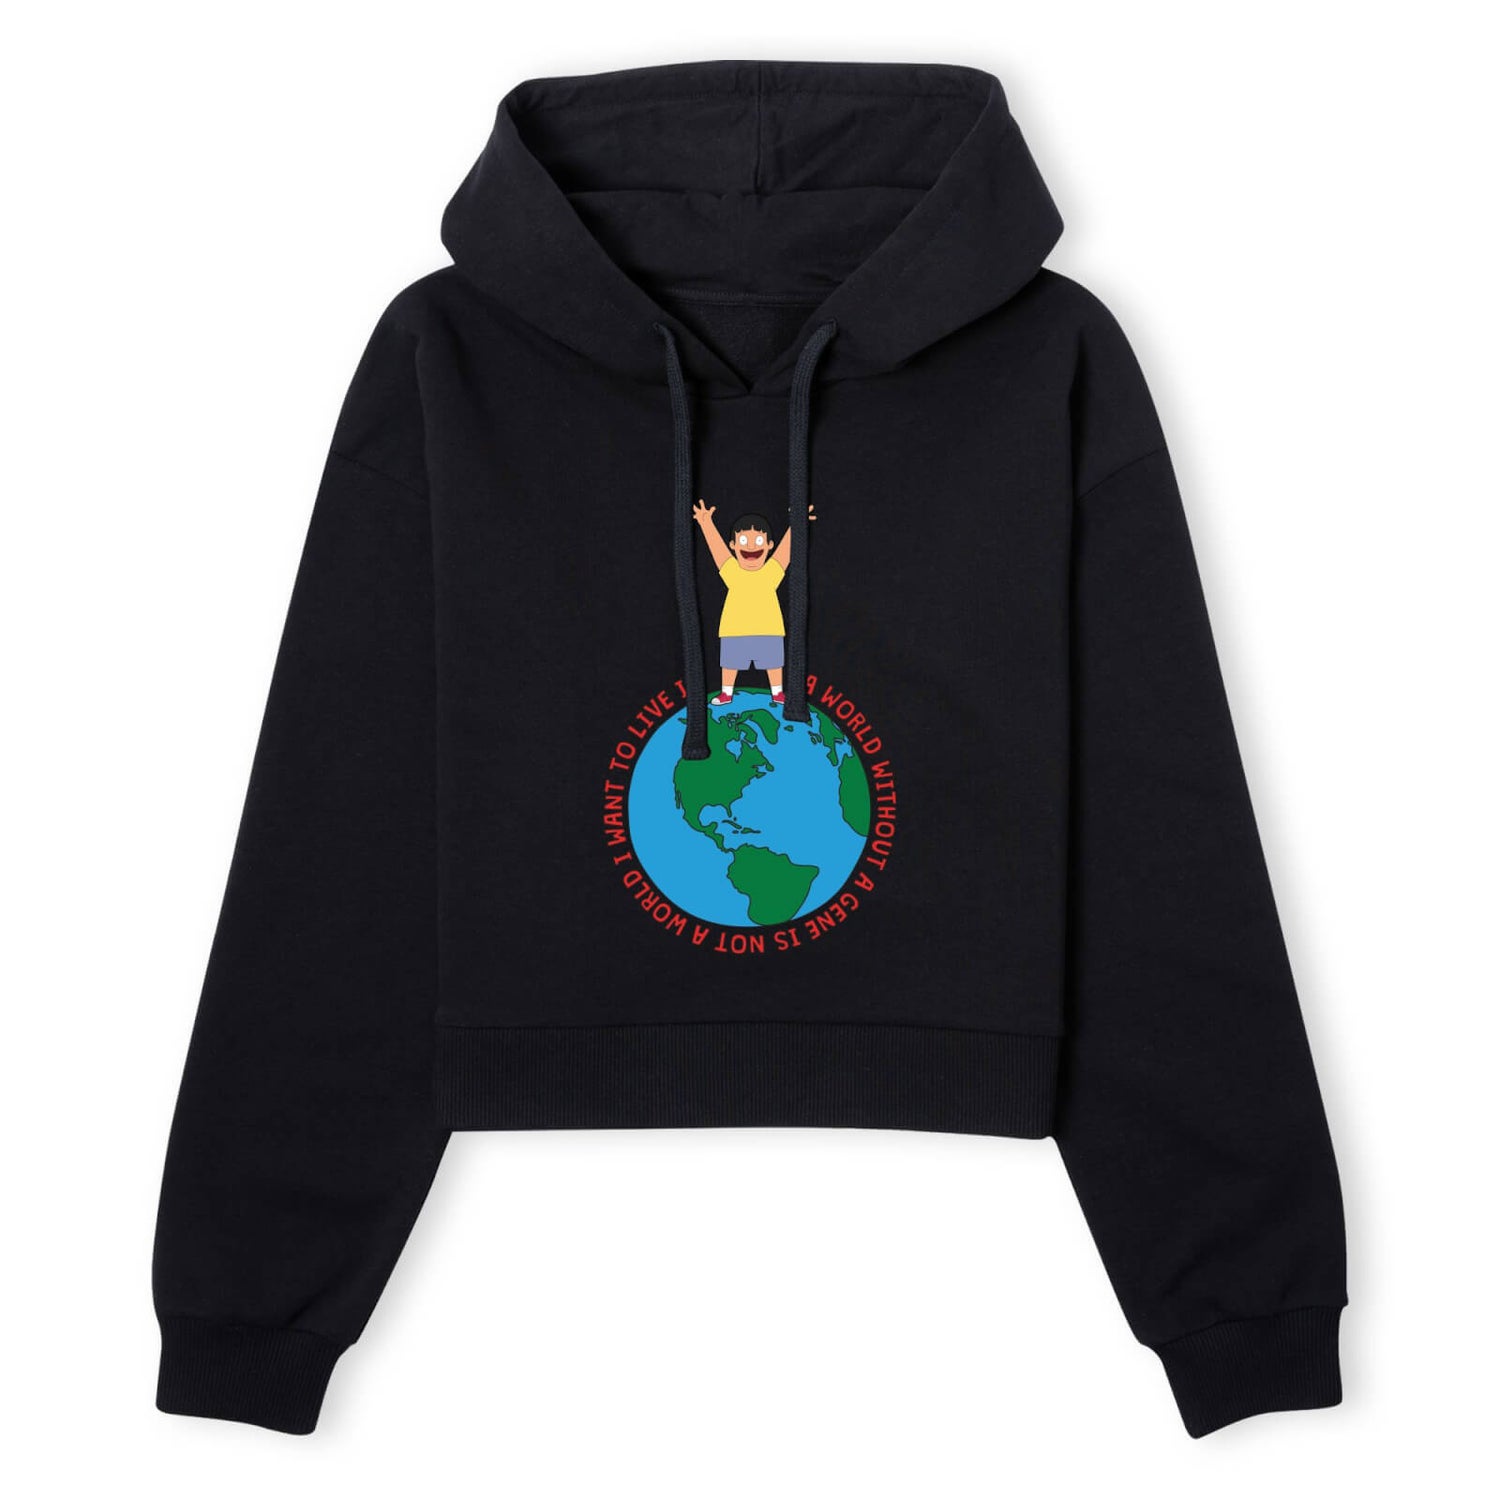 Bob&apos;s Burgers A World Without Women's Cropped Hoodie - Black